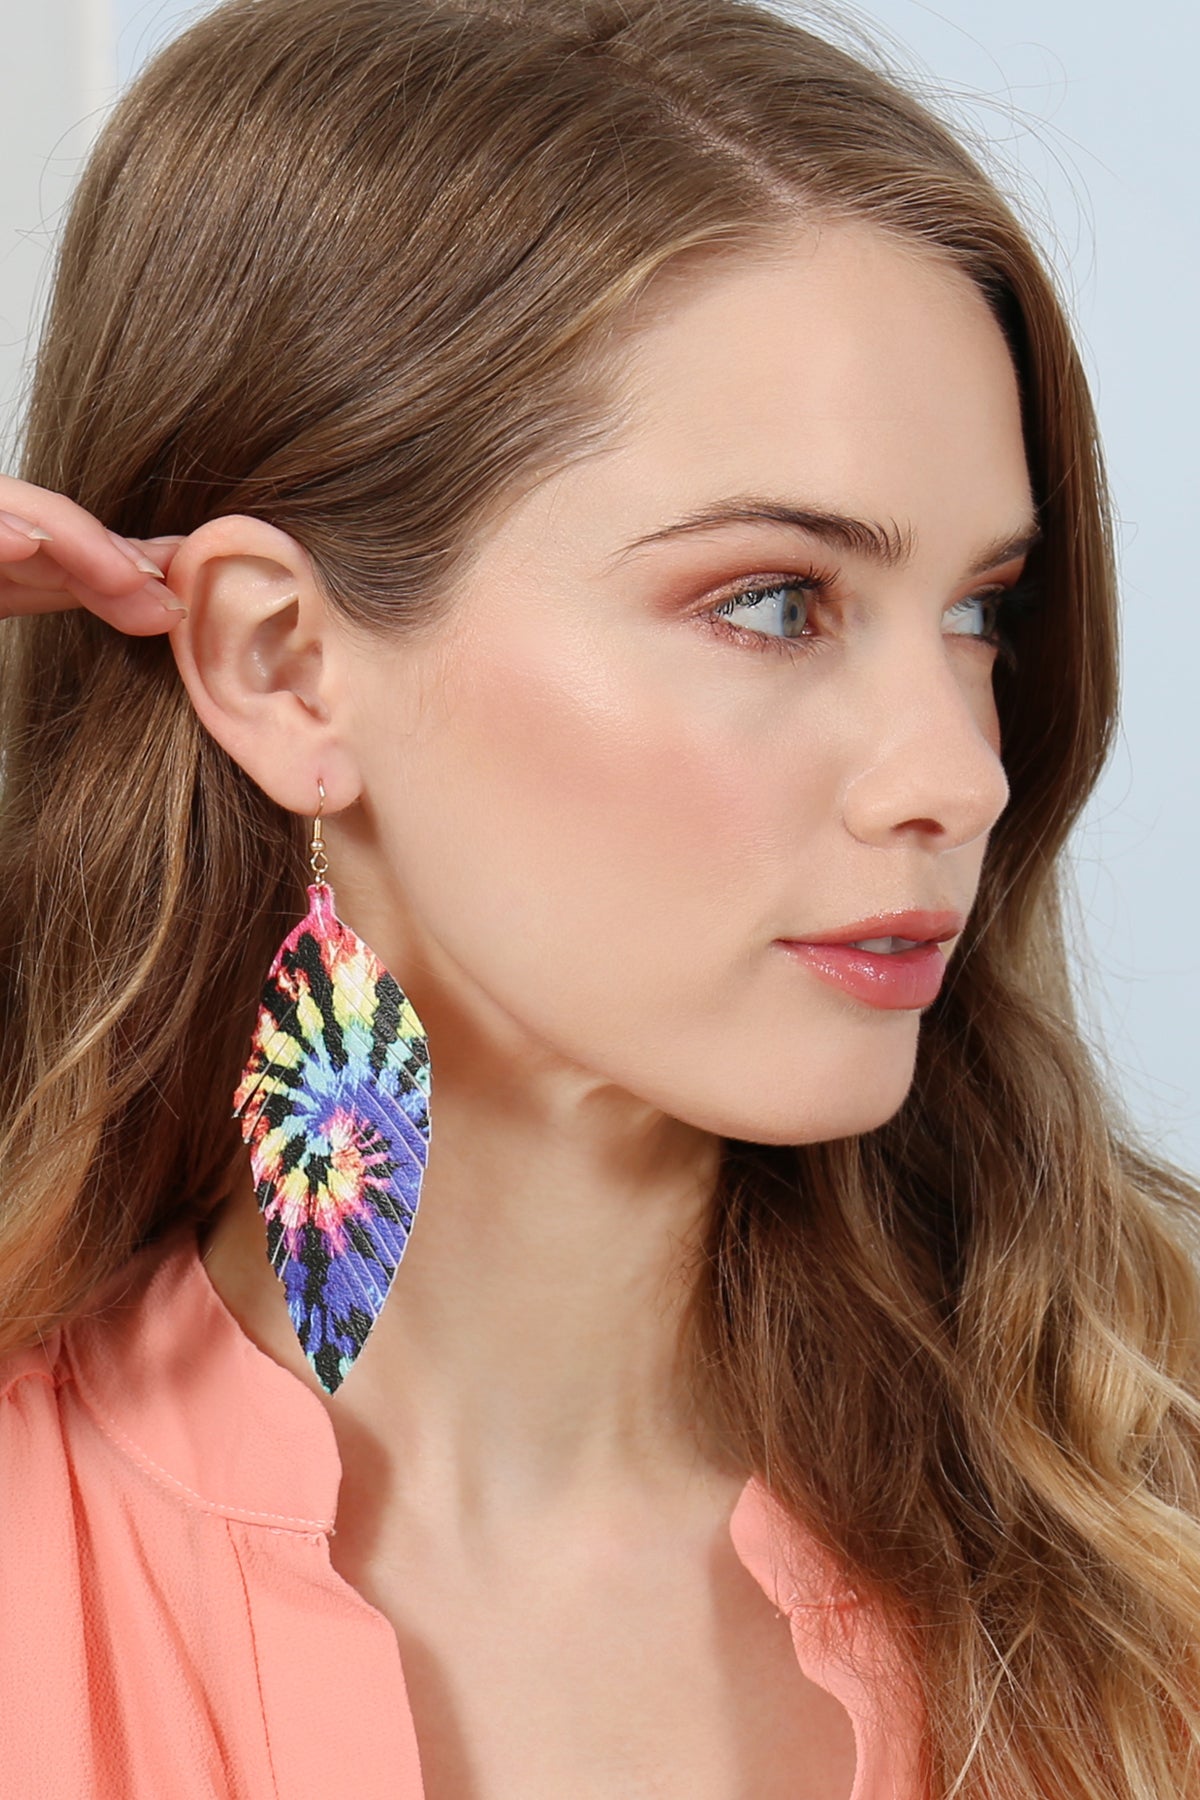 VIBRANT LEATHER DROP EARRINGS/6PAIRS (NOW $0.75 ONLY!)